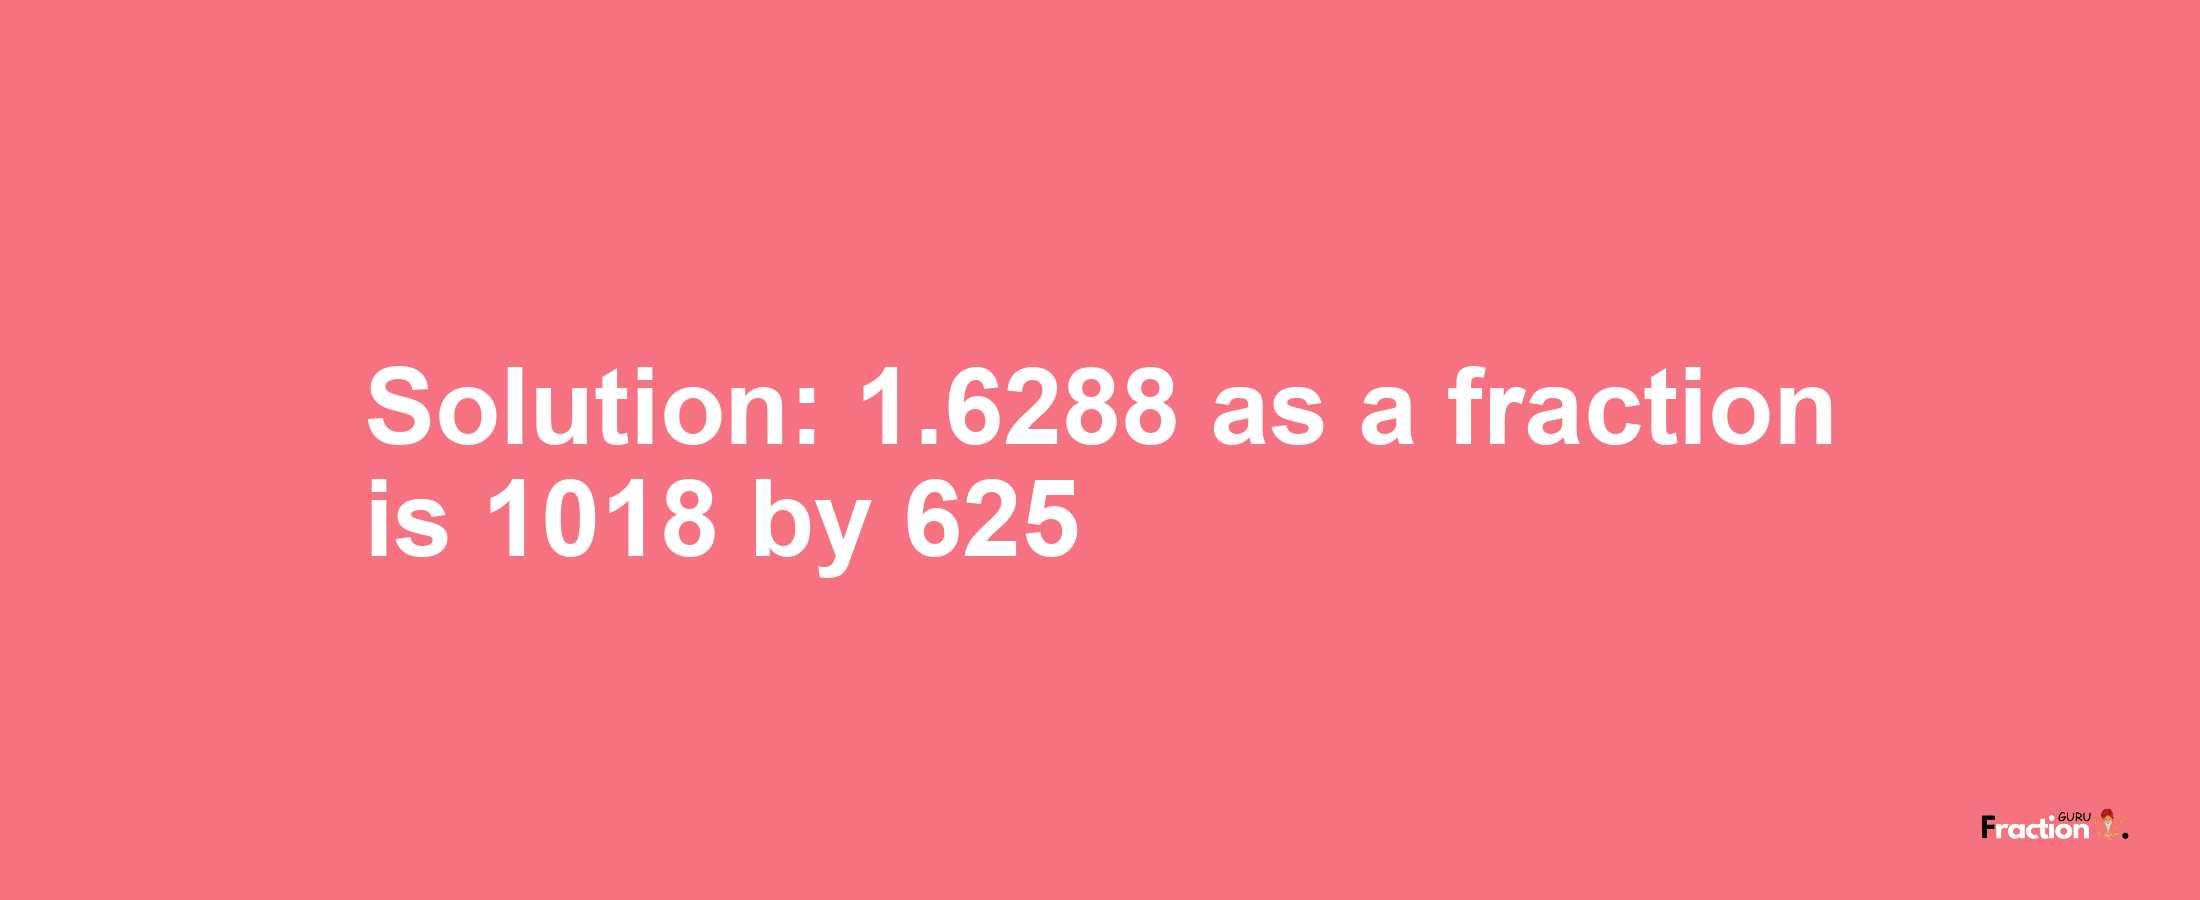 Solution:1.6288 as a fraction is 1018/625